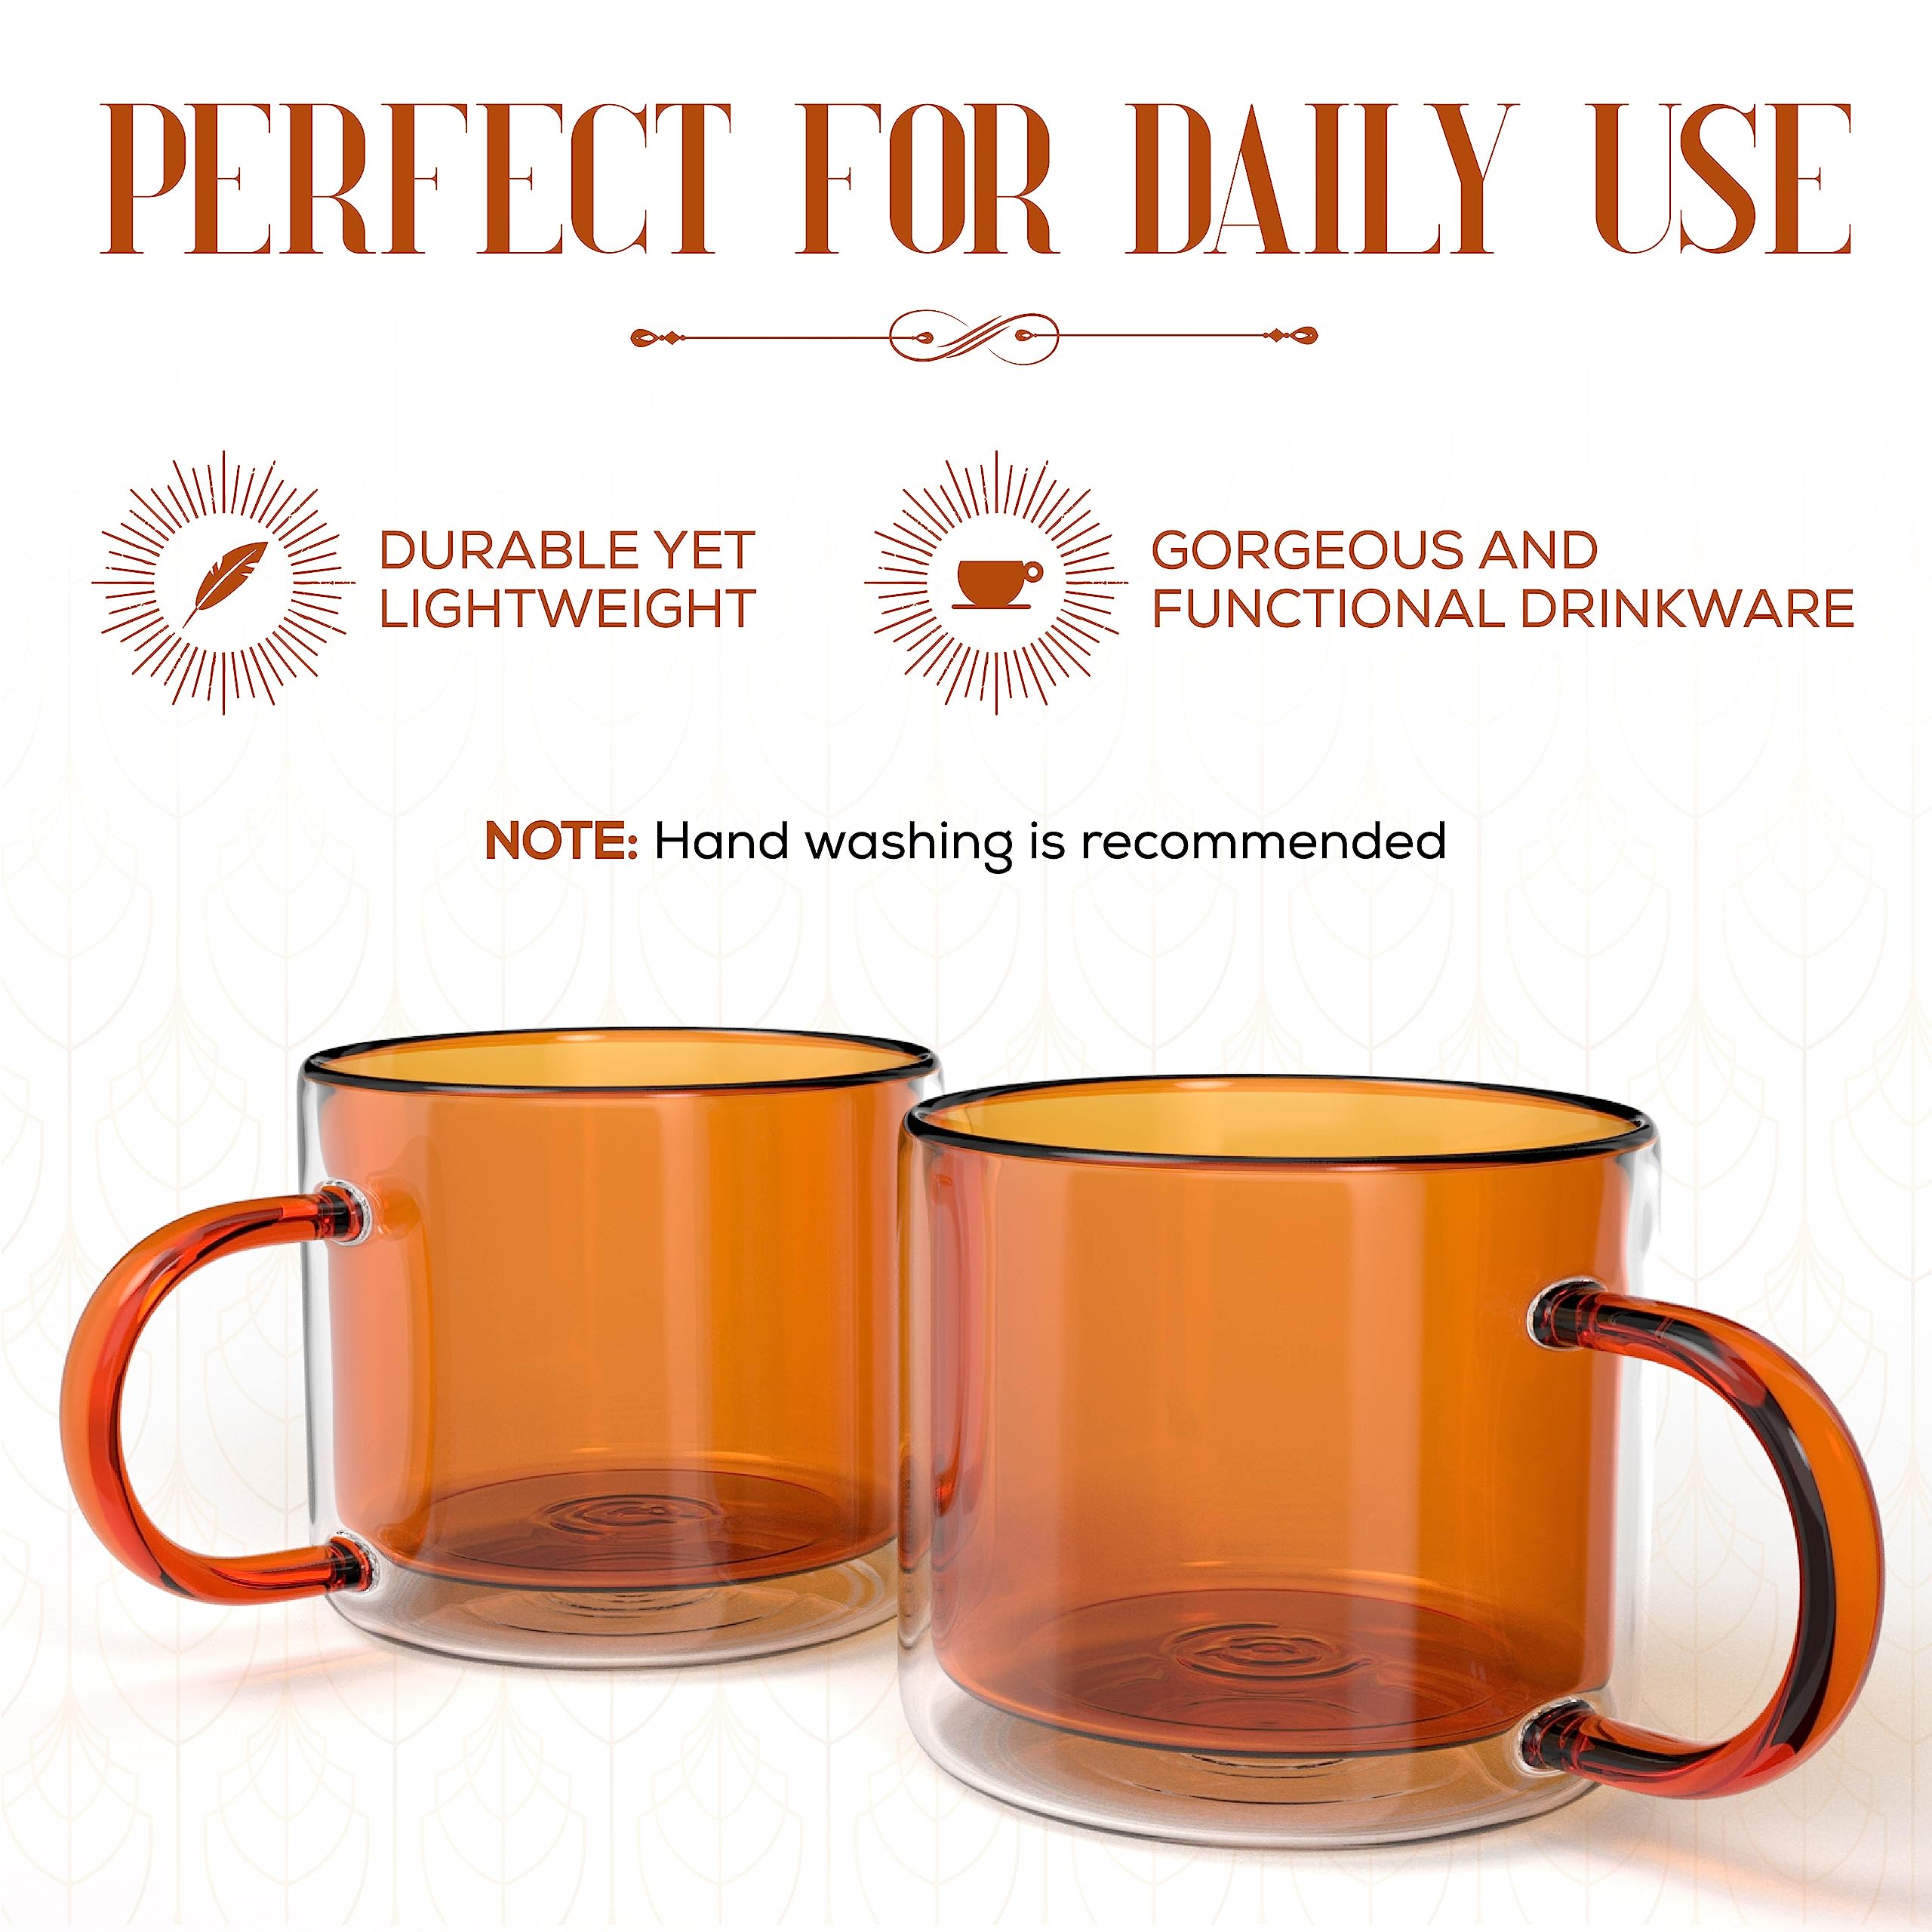 elle decor Double Wall Coffee Mug | Set of 2 | 10-Ounce | Cute Coffee, Tea, and Milk Glass Mugs with Handle | Insulated Tea Cup | Gift Set for Valentines Day, Birthday, & Holidays (Amber)